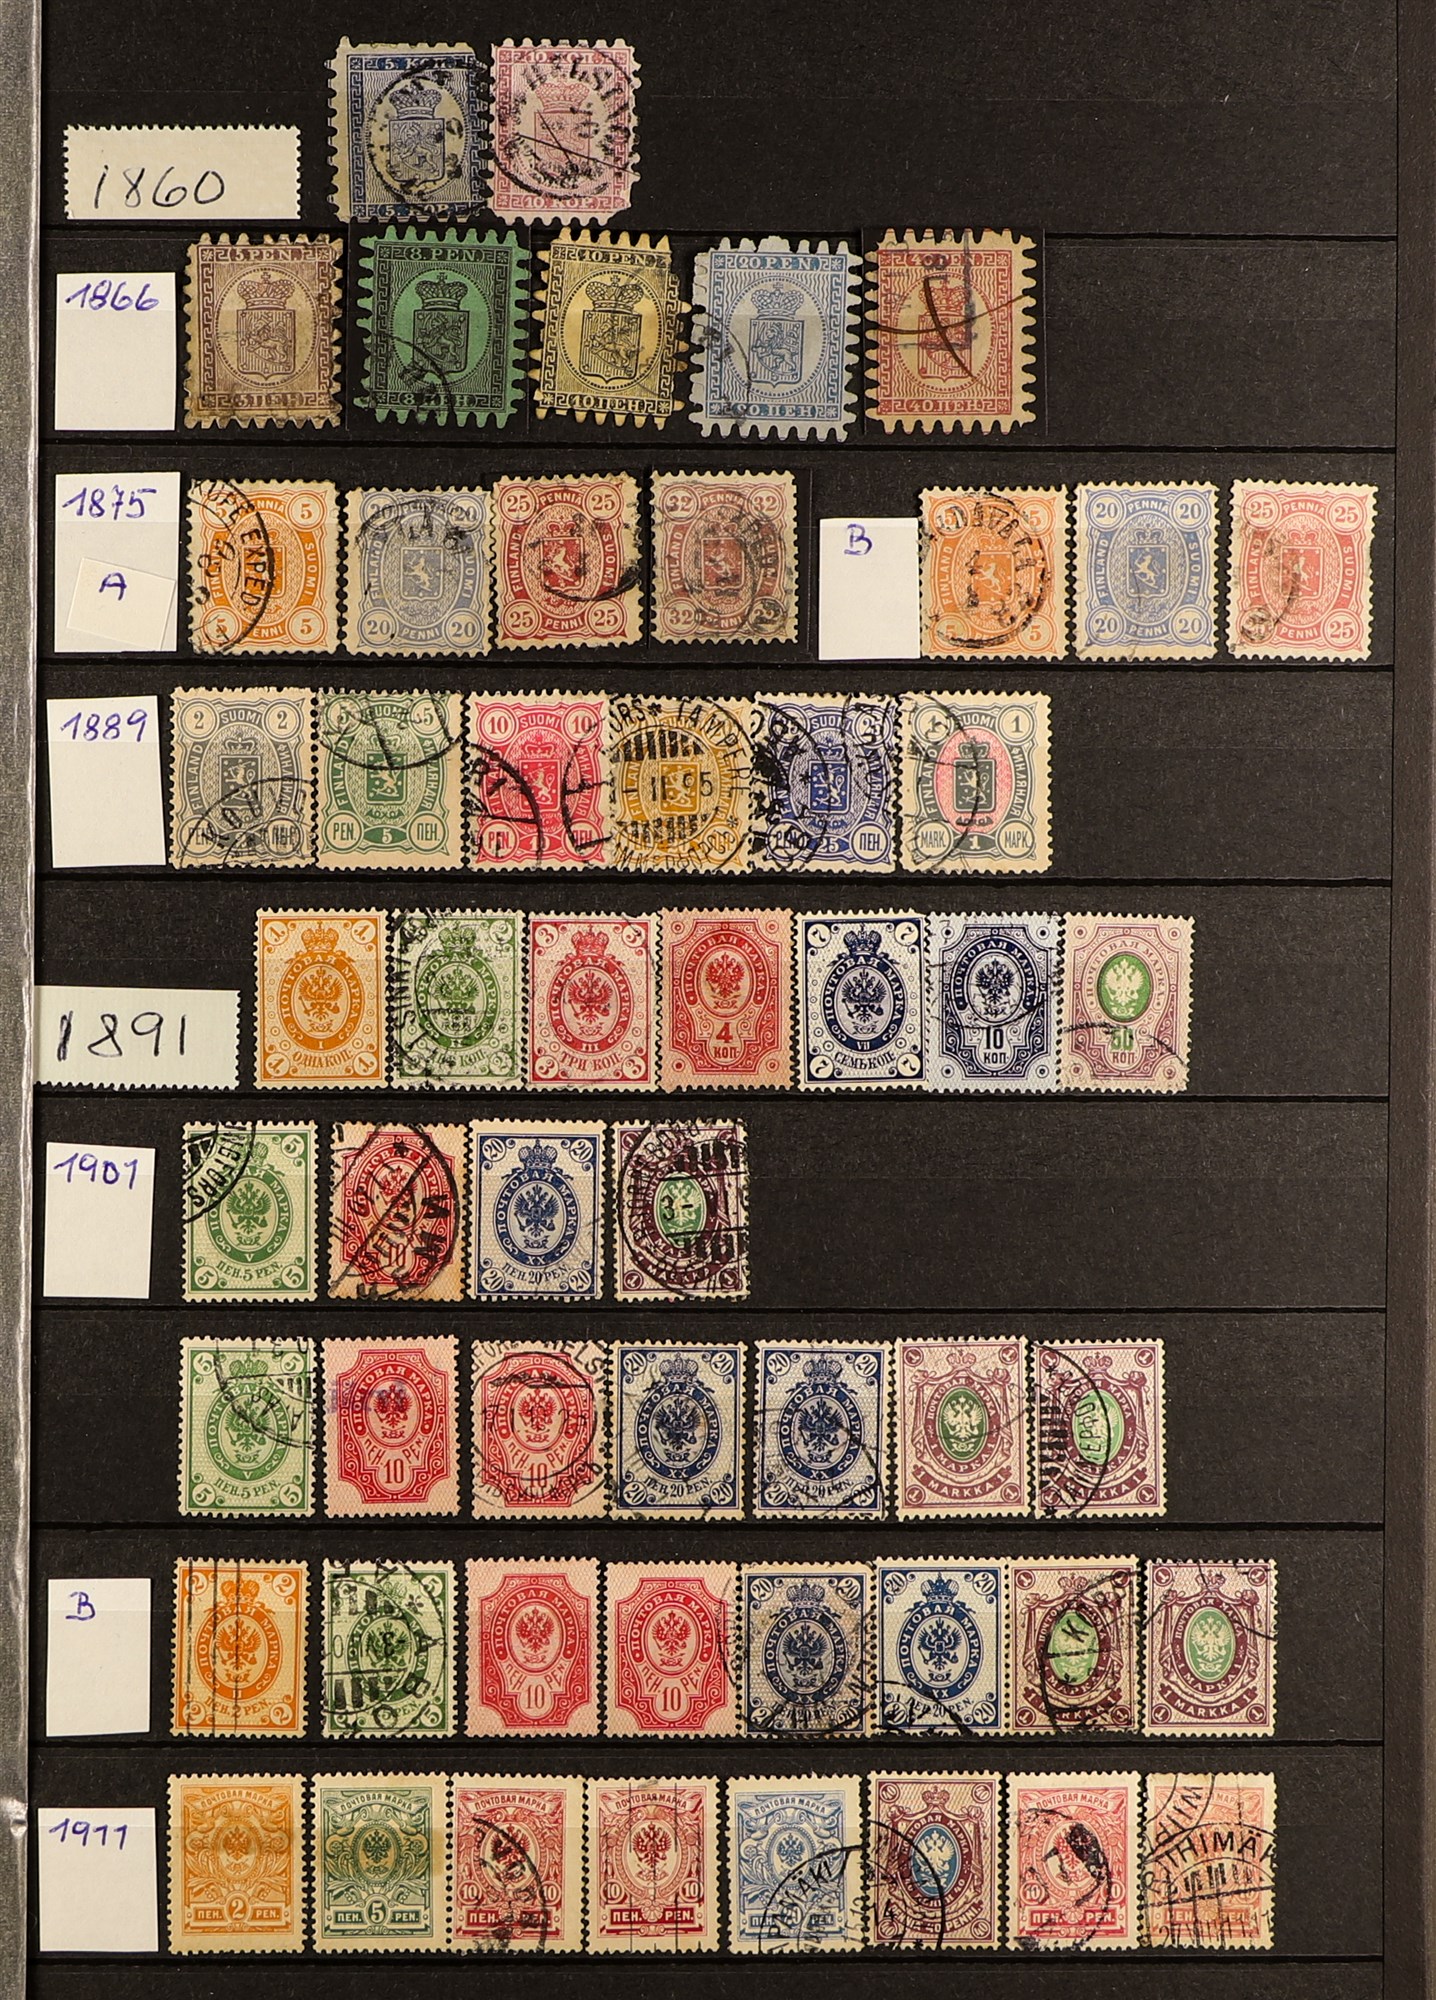 FINLAND 1860 - 2010's ACCUMULATION IN CARTON of mint / never hinged mint & used stamps and miniature - Image 23 of 34